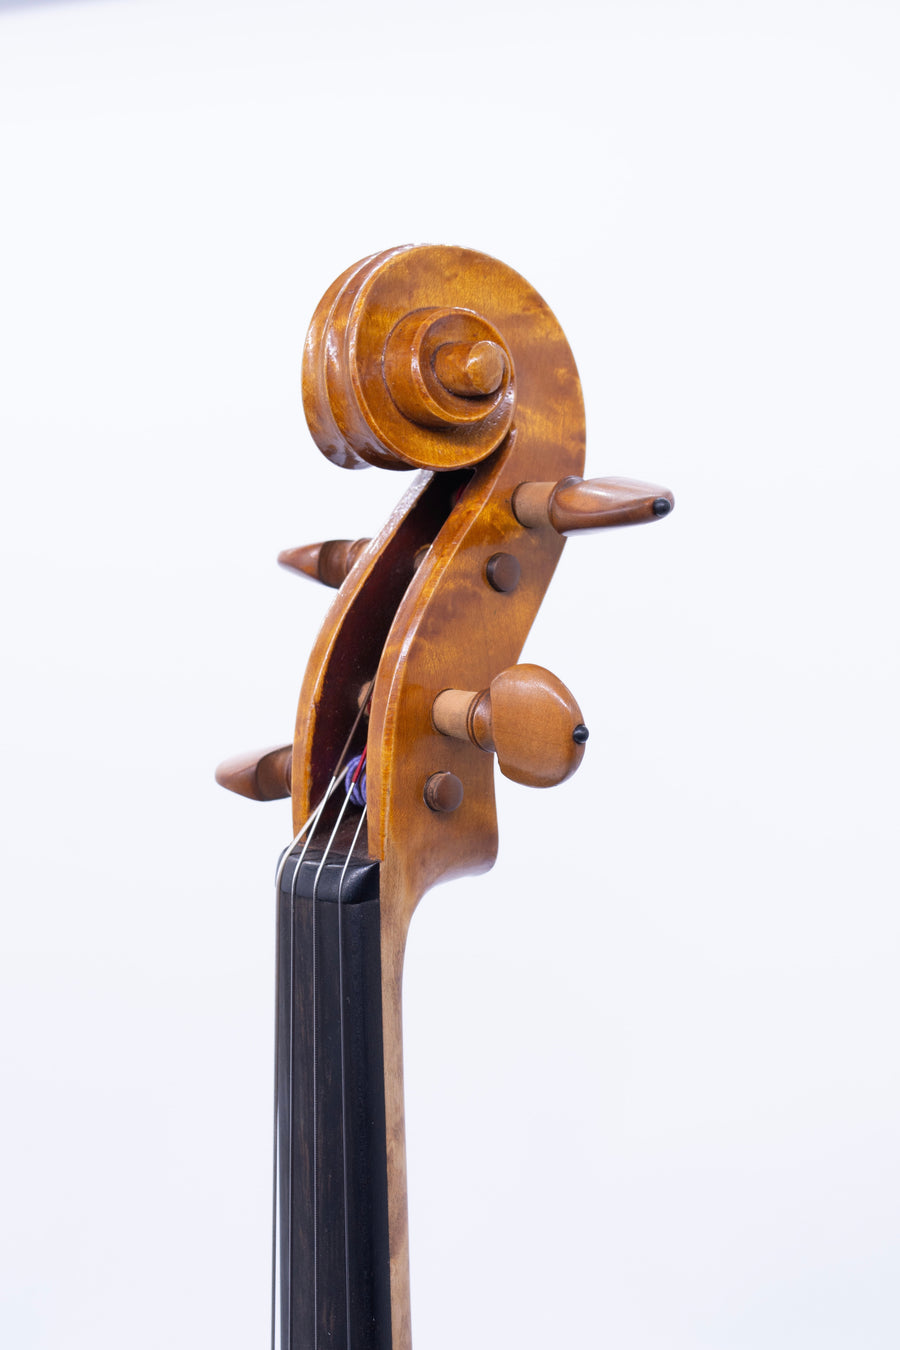 A French-American Viola by Paul Hilaire for Thomas L. Fawick, 1955. 16 3/8”